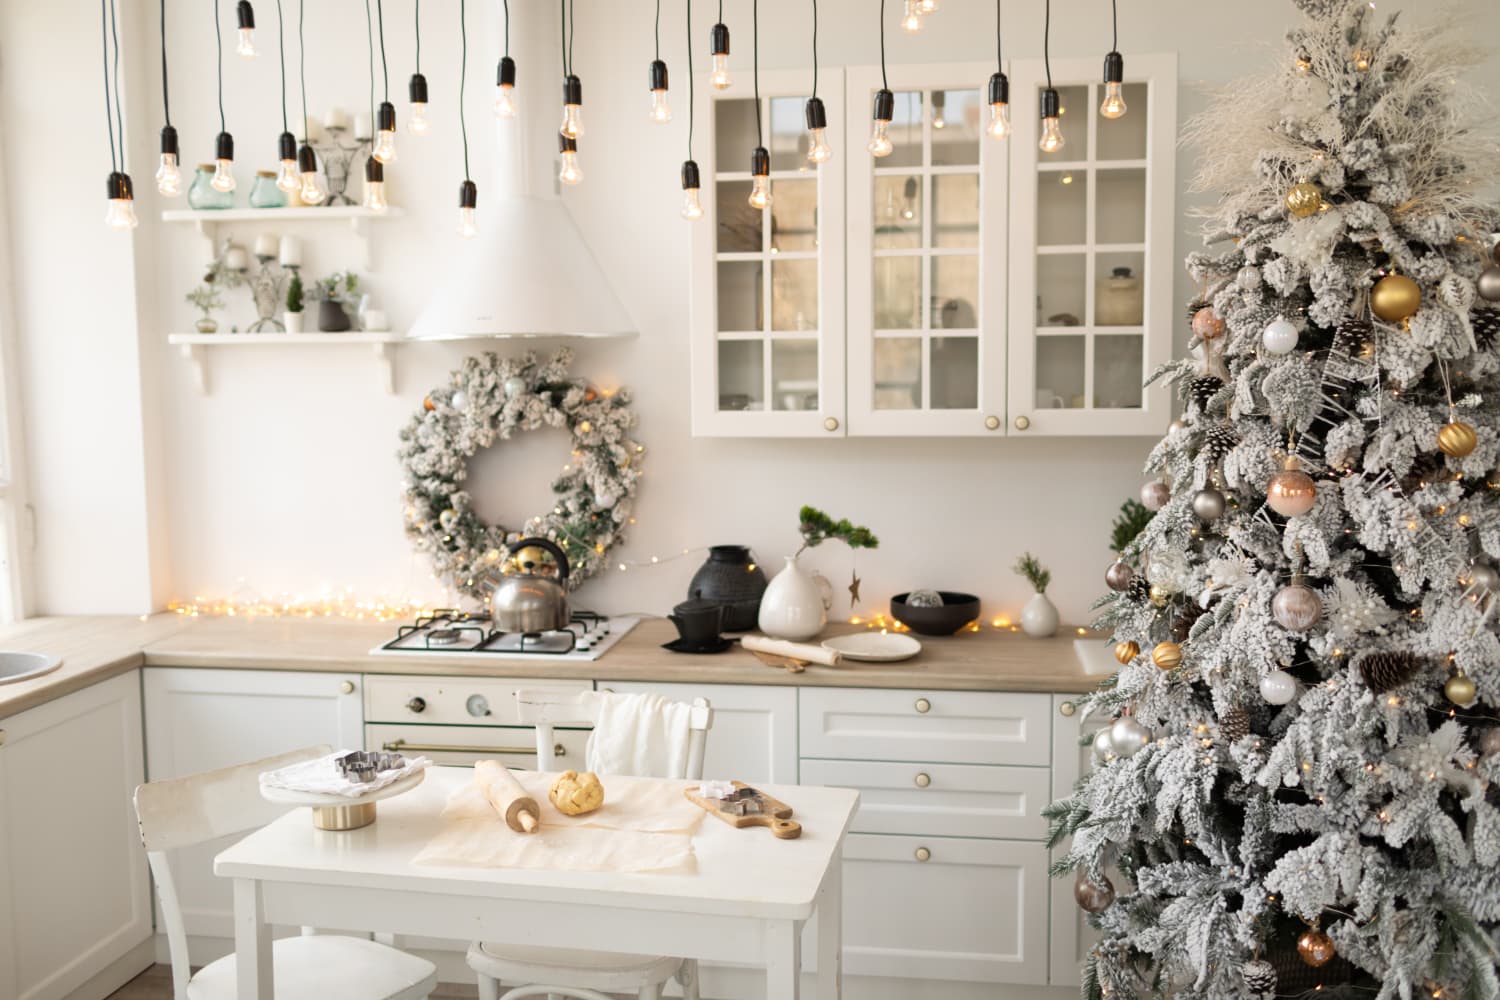 5 Ways to Make Your Home Smell Like Christmas, According to a Fragrance Expert